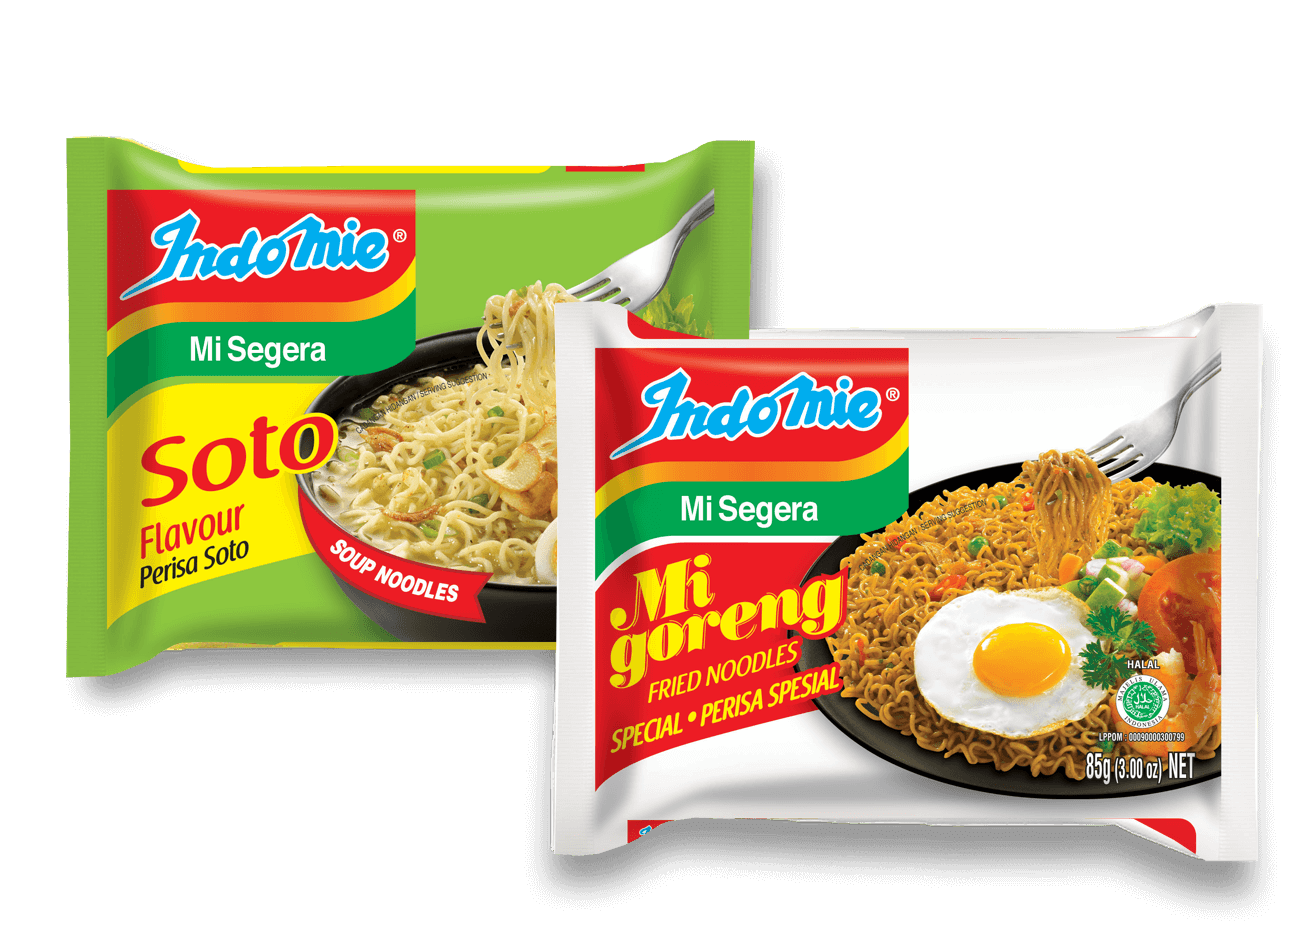 About Indomie Malaysia